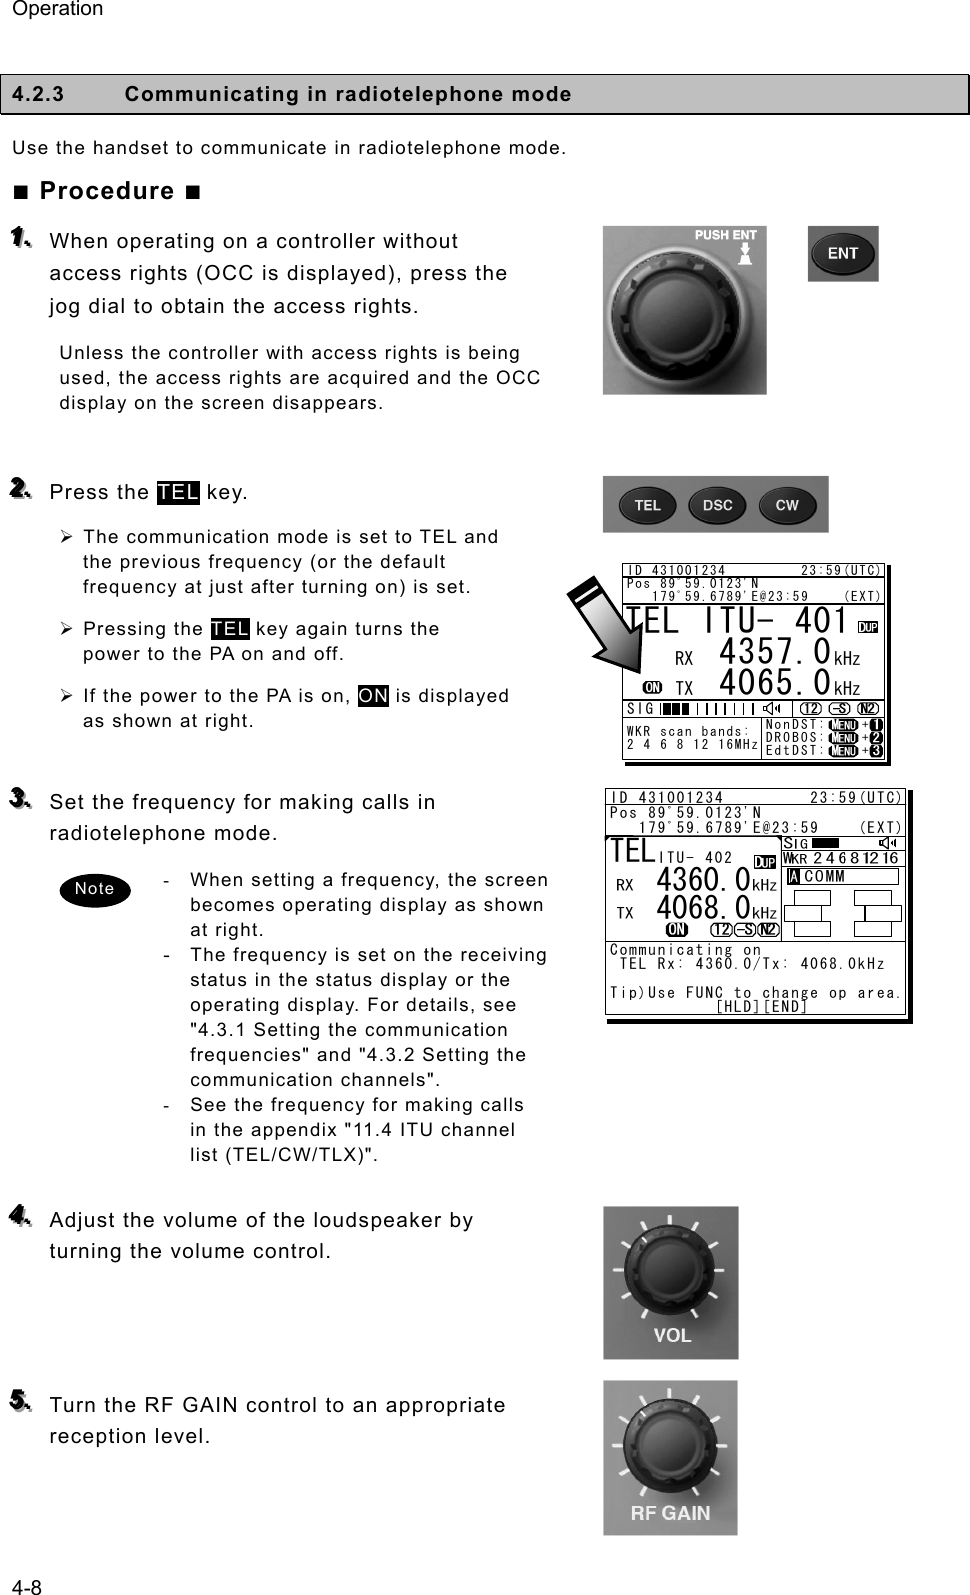 Operation 4-8  4.2.3  Communicating in radiotelephone mode   Use the handset to communicate in radiotelephone mode.   ■ Procedure ■ 111...   When operating on a controller without access rights (OCC is displayed), press the jog dial to obtain the access rights.   Unless the controller with access rights is being used, the access rights are acquired and the OCC display on the screen disappears.    222...   Press the TEL key.   ¾ The communication mode is set to TEL and the previous frequency (or the default frequency at just after turning on) is set. ¾ Pressing the TEL key again turns the power to the PA on and off.   ¾ If the power to the PA is on, ON is displayed as shown at right.    333...   Set the frequency for making calls in radiotelephone mode.   -  When setting a frequency, the screen becomes operating display as shown at right. - The frequency is set on the receiving status in the status display or the operating display. For details, see &quot;4.3.1 Setting the communication frequencies&quot; and &quot;4.3.2 Setting the communication channels&quot;.   -  See the frequency for making calls in the appendix &quot;11.4 ITU channel list (TEL/CW/TLX)&quot;.    444...   Adjust the volume of the loudspeaker by turning the volume control.      555...   Turn the RF GAIN control to an appropriate reception level.    TEL ITU- 401     4357.0     4065.0RX  kHzTX kHzNonDST:    +DROBOS:    +EdtDST:    +ID 431001234         23:59(UTC)Pos 89ﾟ59.0123&apos;N   179ﾟ59.6789&apos;E@23:59    (EXT)SIGWKR scan bands:2 4 6 8 12 16MHzNote ID 431001234         23:59(UTC)Pos 89ﾟ59.0123&apos;N   179ﾟ59.6789&apos;E@23:59    (EXT)Communicating on TEL Rx: 4360.0/Tx: 4068.0kHzTip)Use FUNC to change op area.           [HLD][END]AATEL   4360.0   4068.0ITU- 402